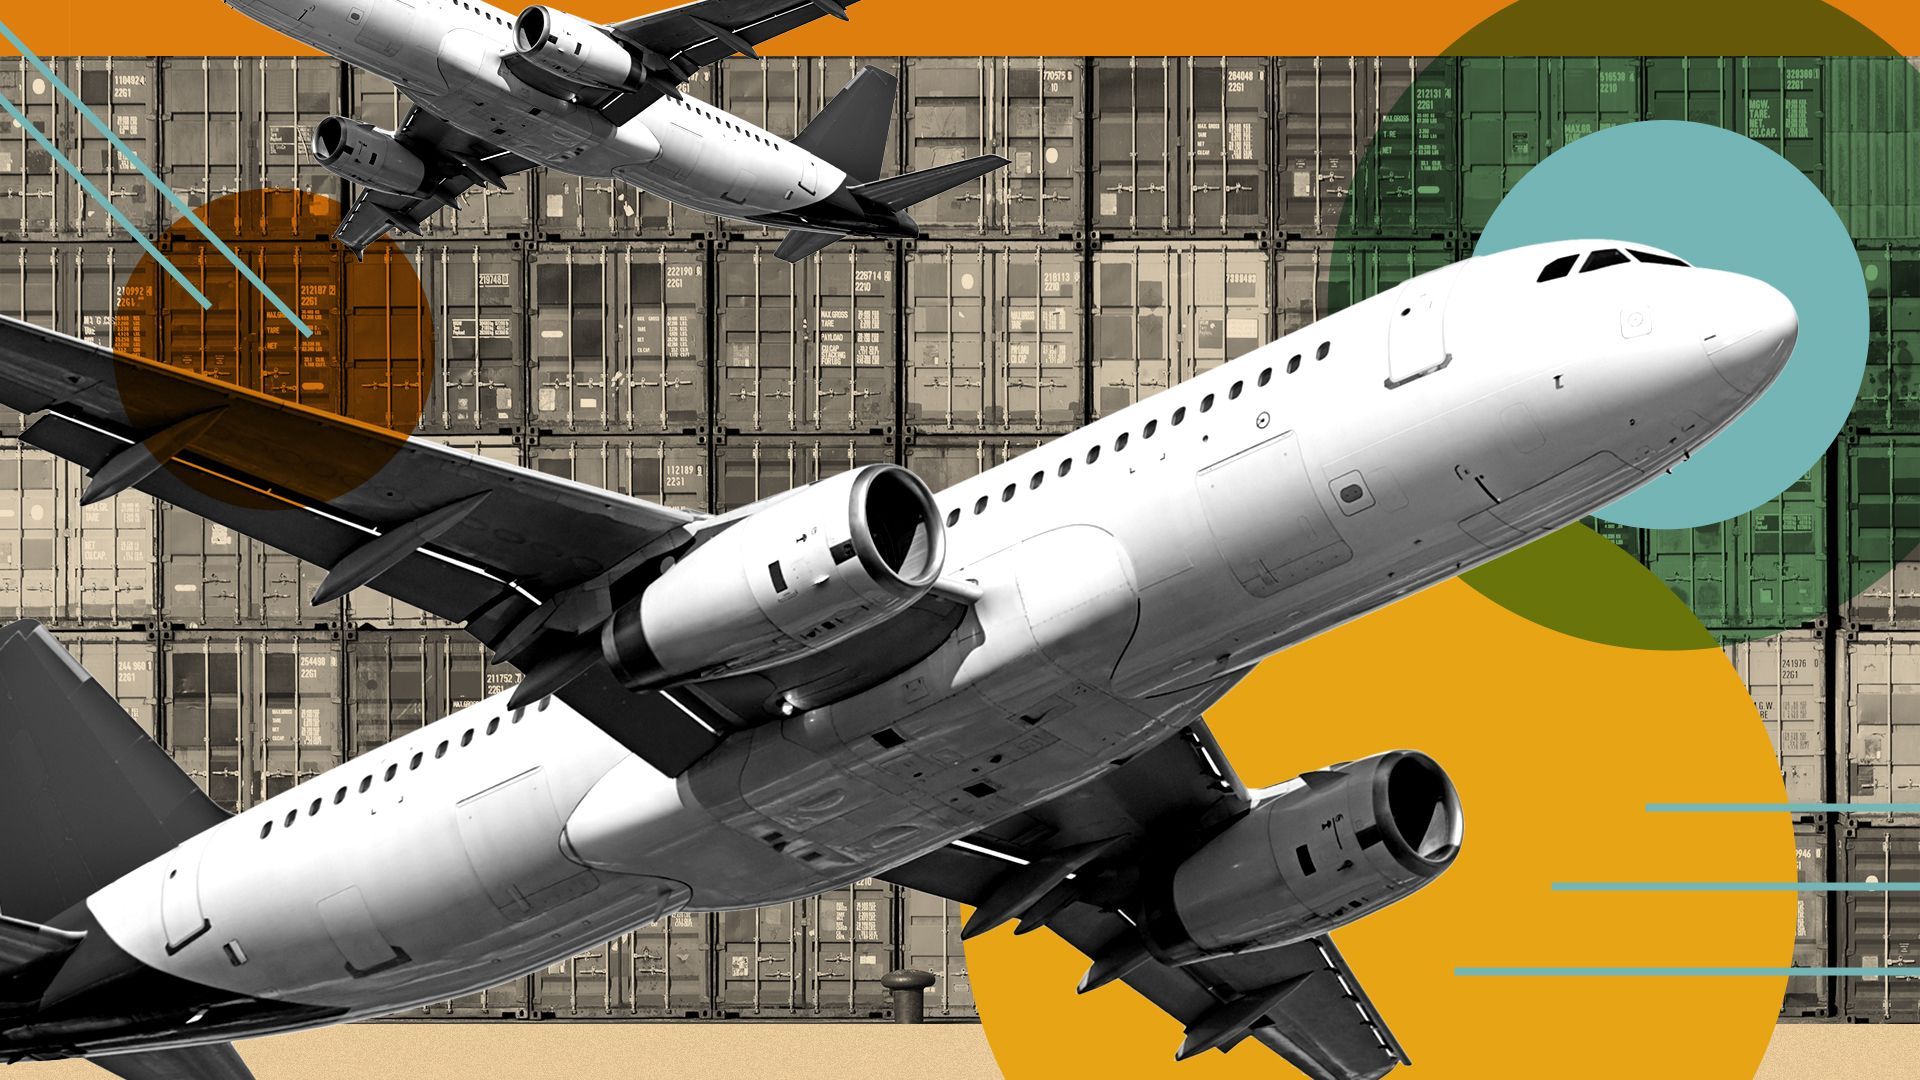 Illustrated collage of airplanes and shipping containers.